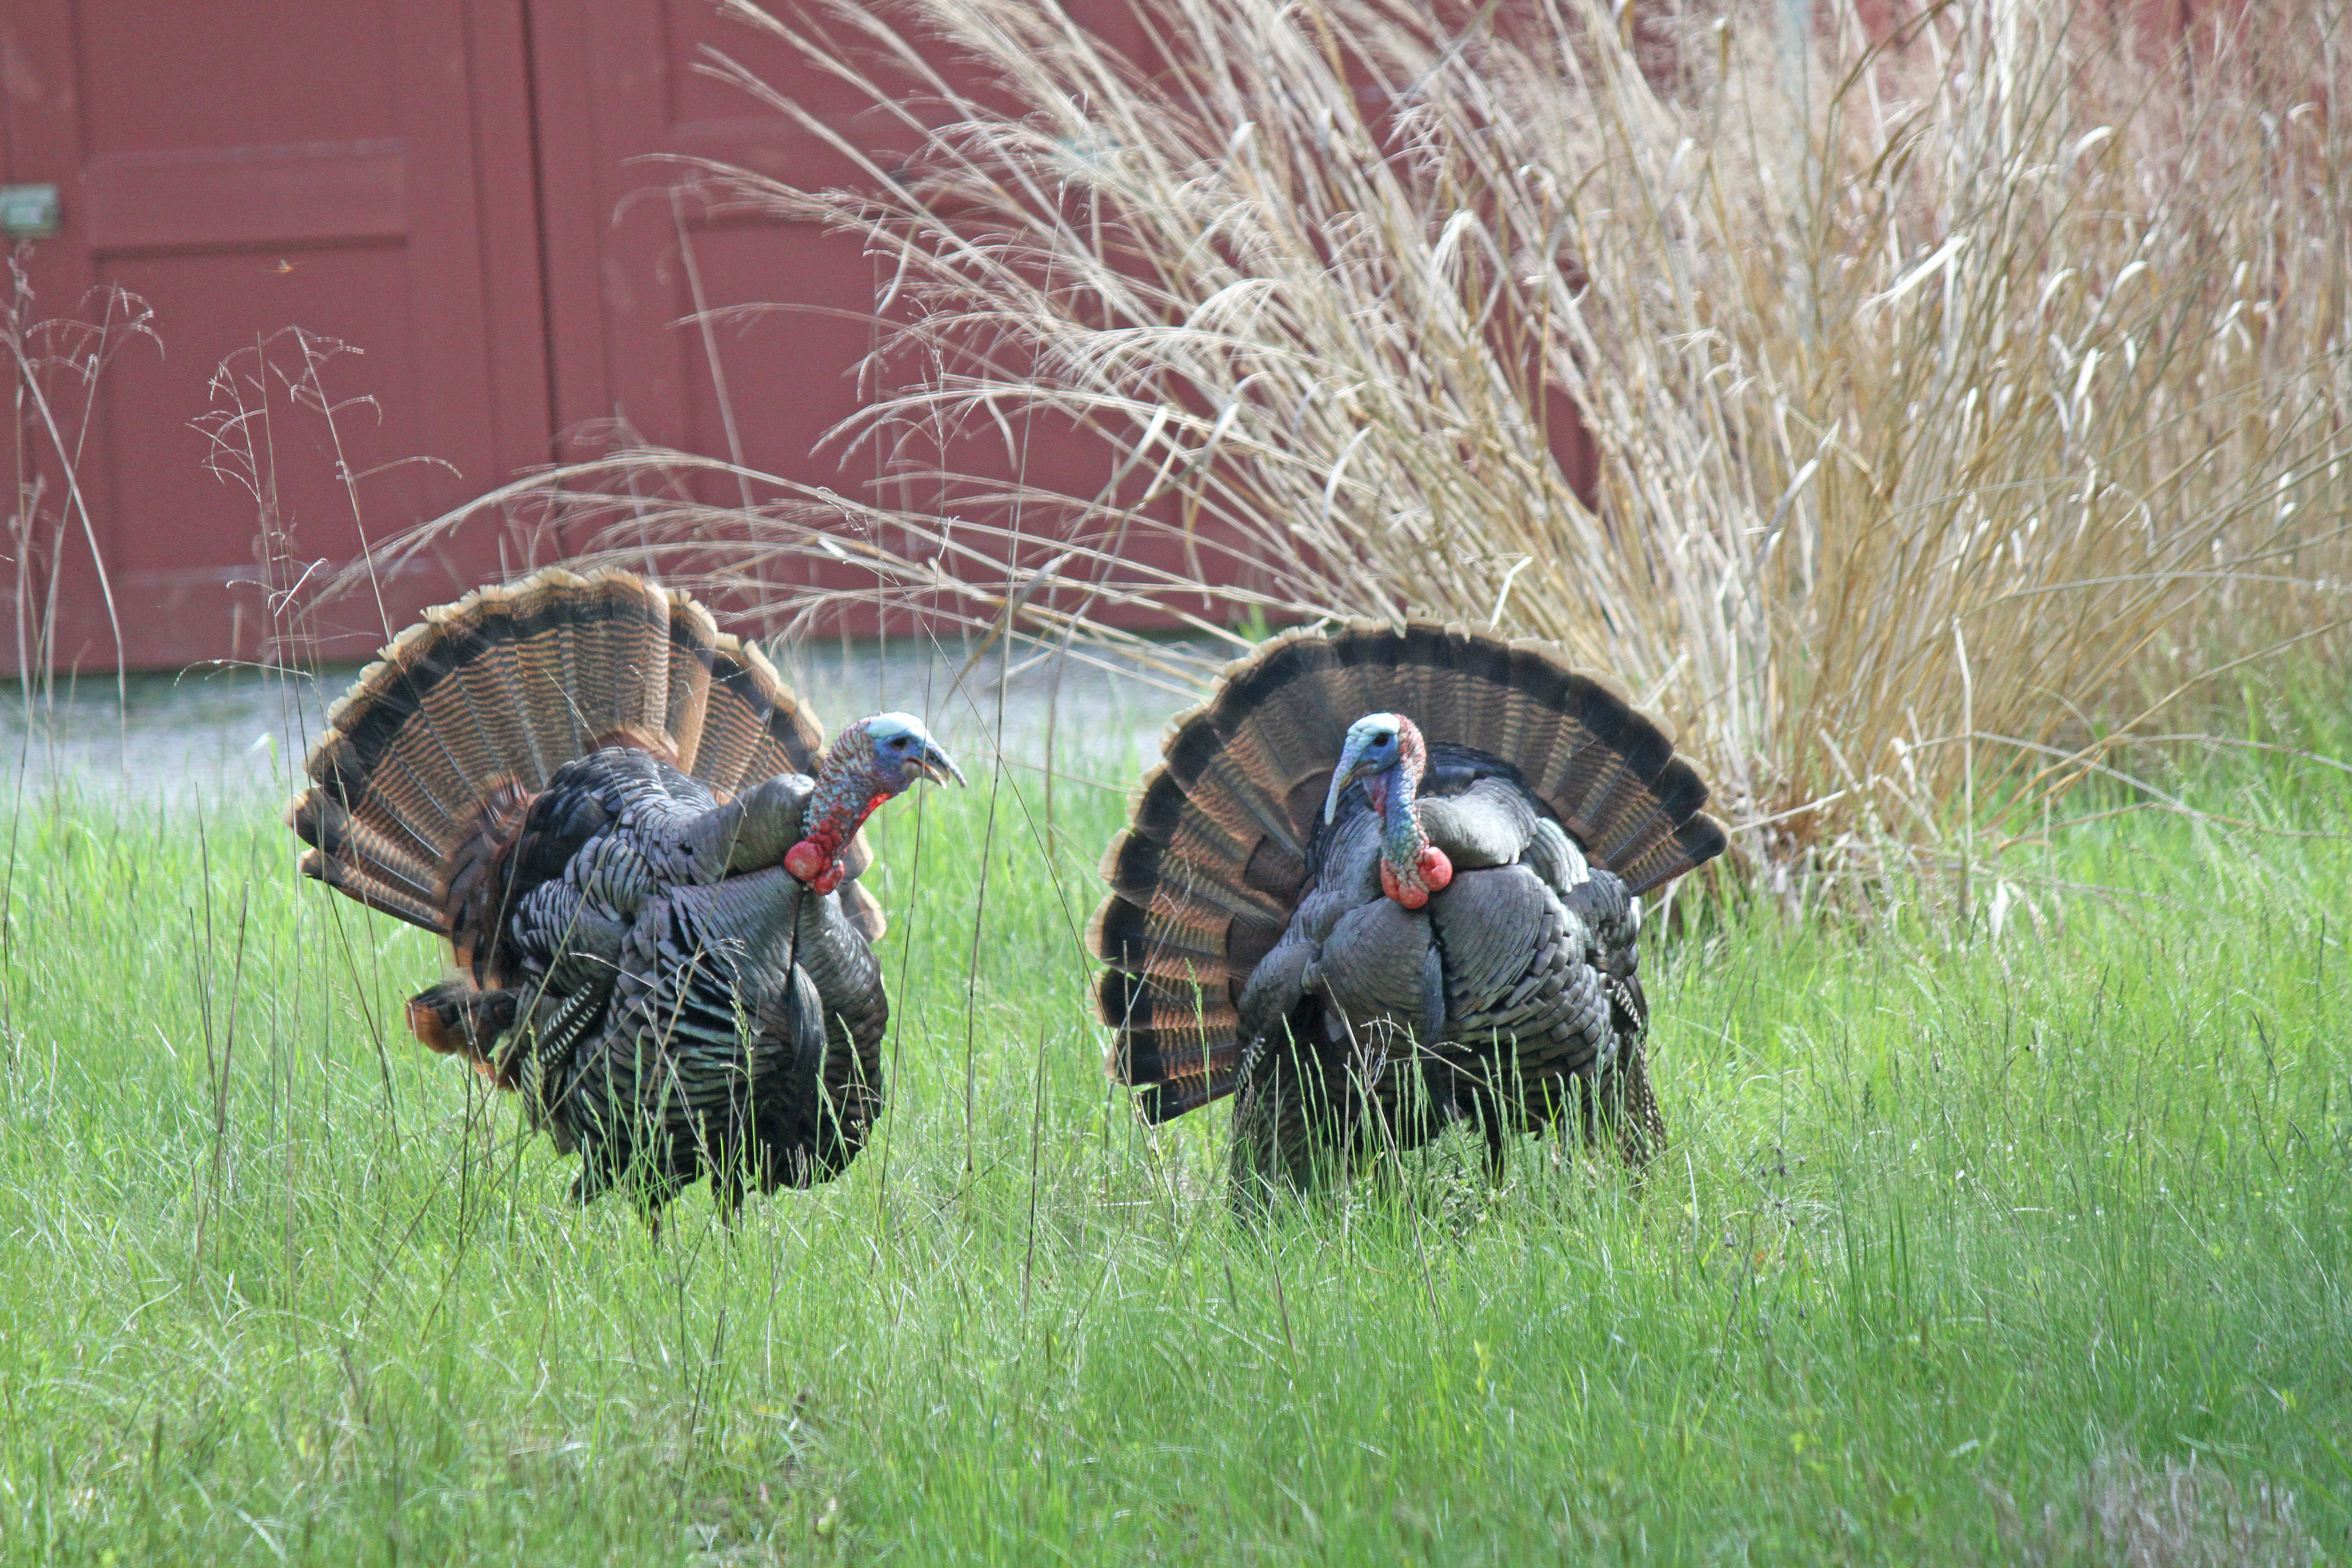 Male turkeys can be protective of their harems.   MICHAEL WRIGHT